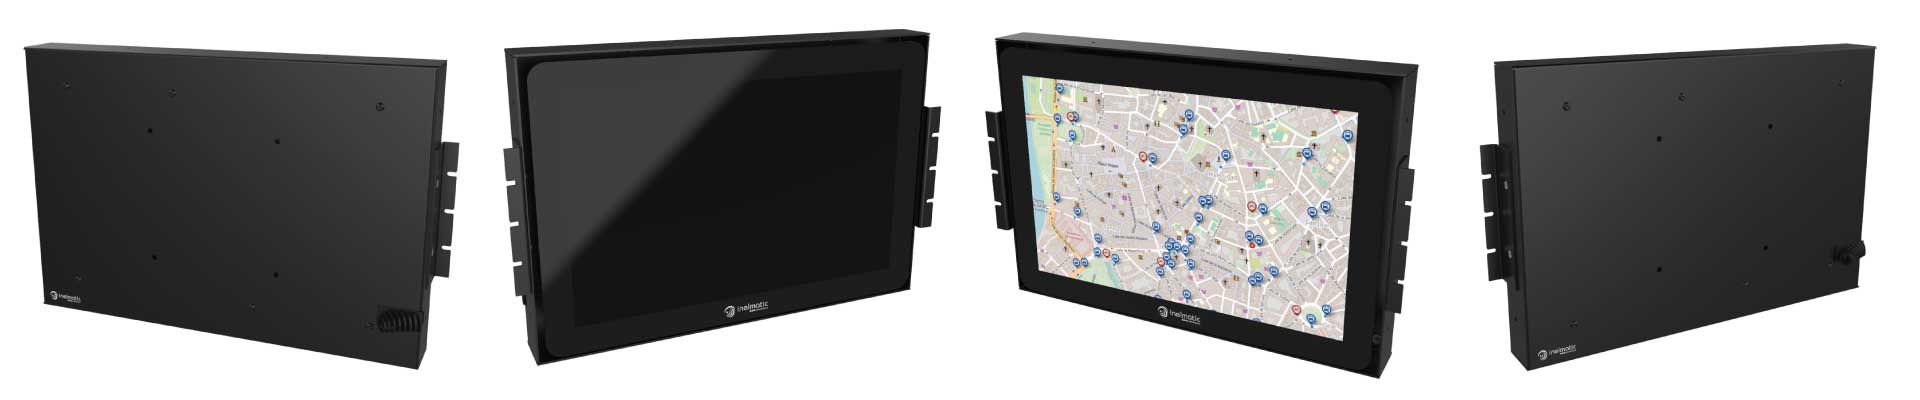 12 inches rugged display - Inelmatic